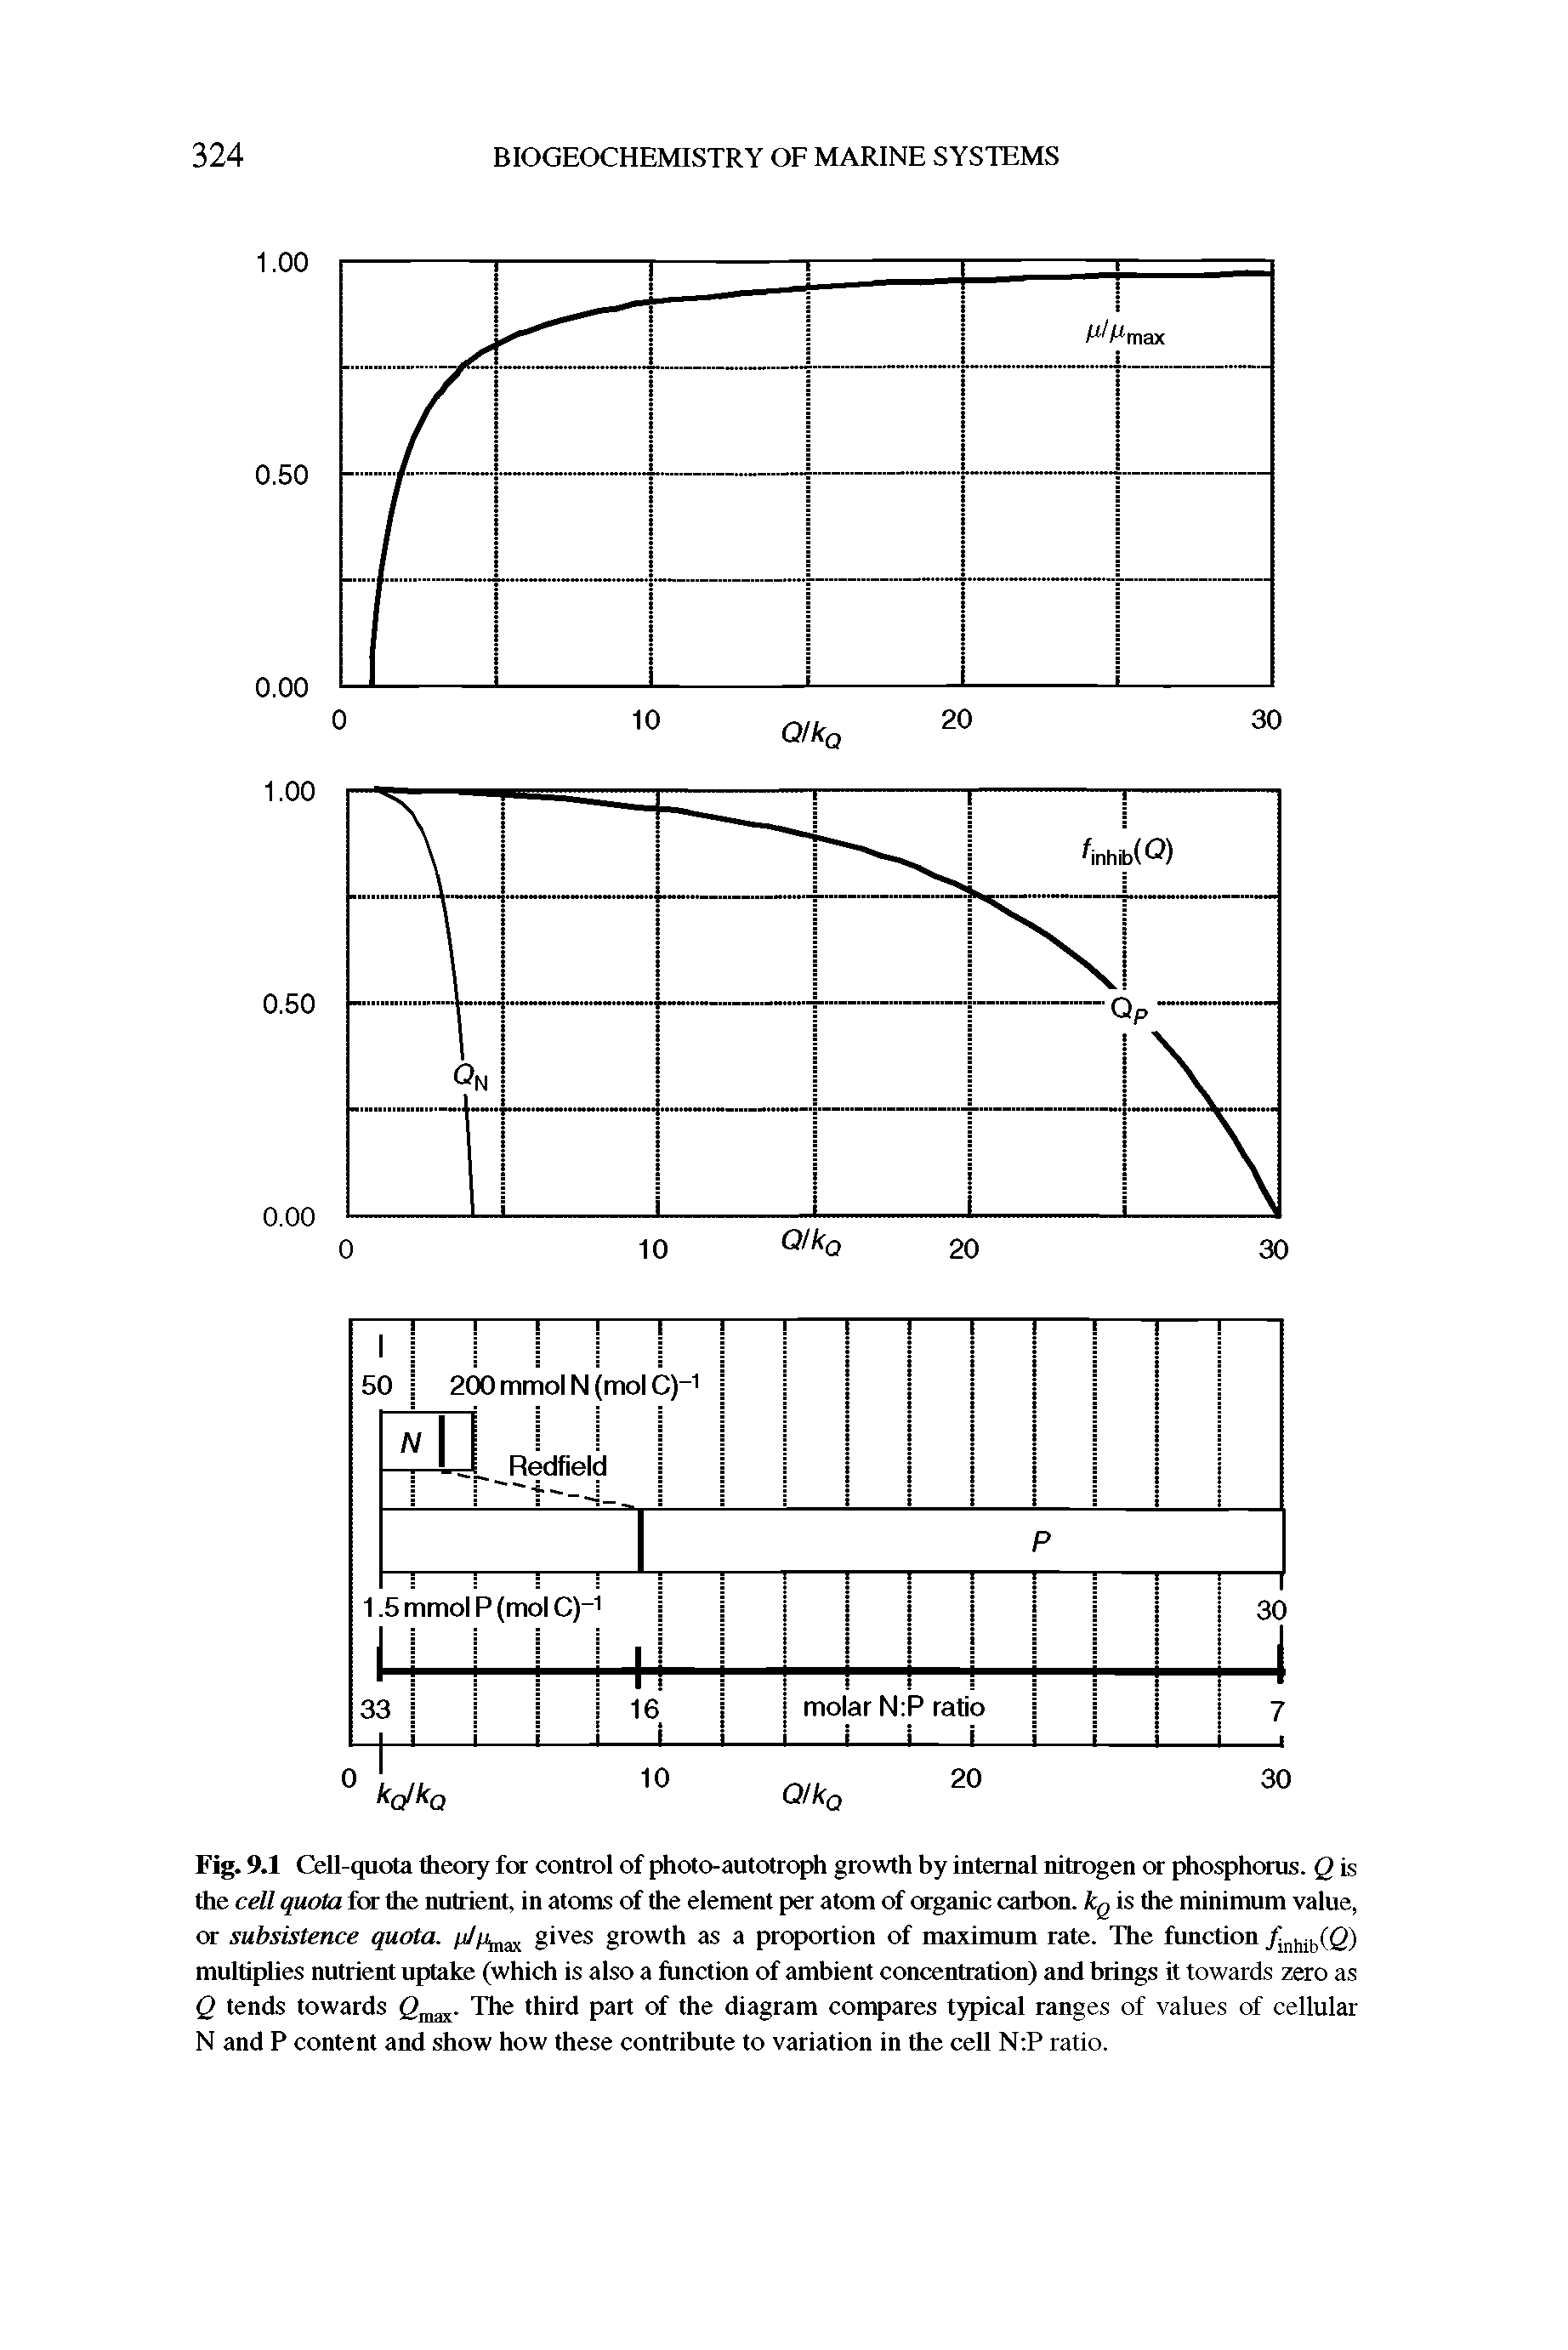 Fig. 9.1 Cell-quota theory for control of photo-autotroph growth by internal nitrogen or phosphorus. Q is the cell quota for the nutrient, in atoms of the element per atom of organic carbon. kfj is the minimum value, or subsistence quota. /////1IU1X gives growth as a proportion of maximum rate. The function 10) multiplies nutrient uptake (which is also a function of ambient concentration) and brings it towards zero as Q tends towards (i llax. The third part of the diagram compares typical ranges of values of cellular N and P content and show how these contribute to variation in the cell N P ratio.